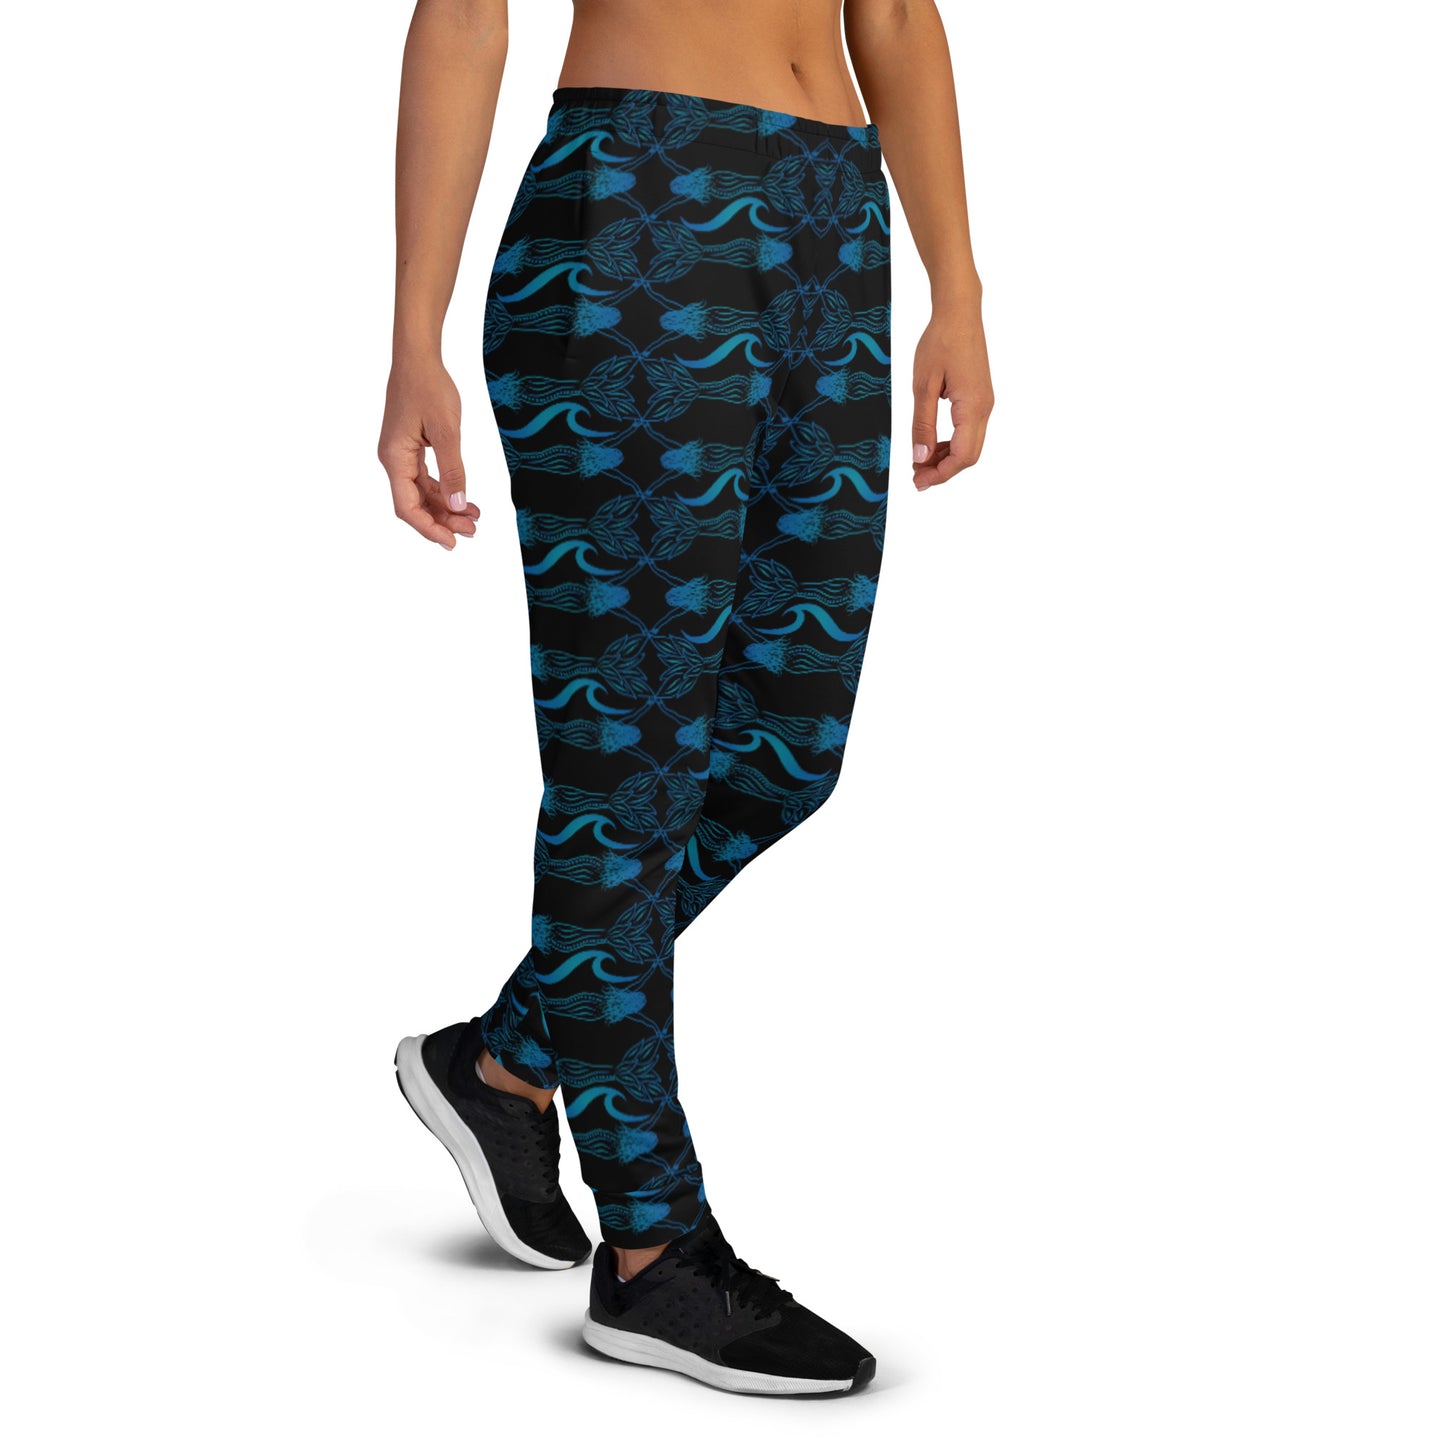 Currently Women's Joggers